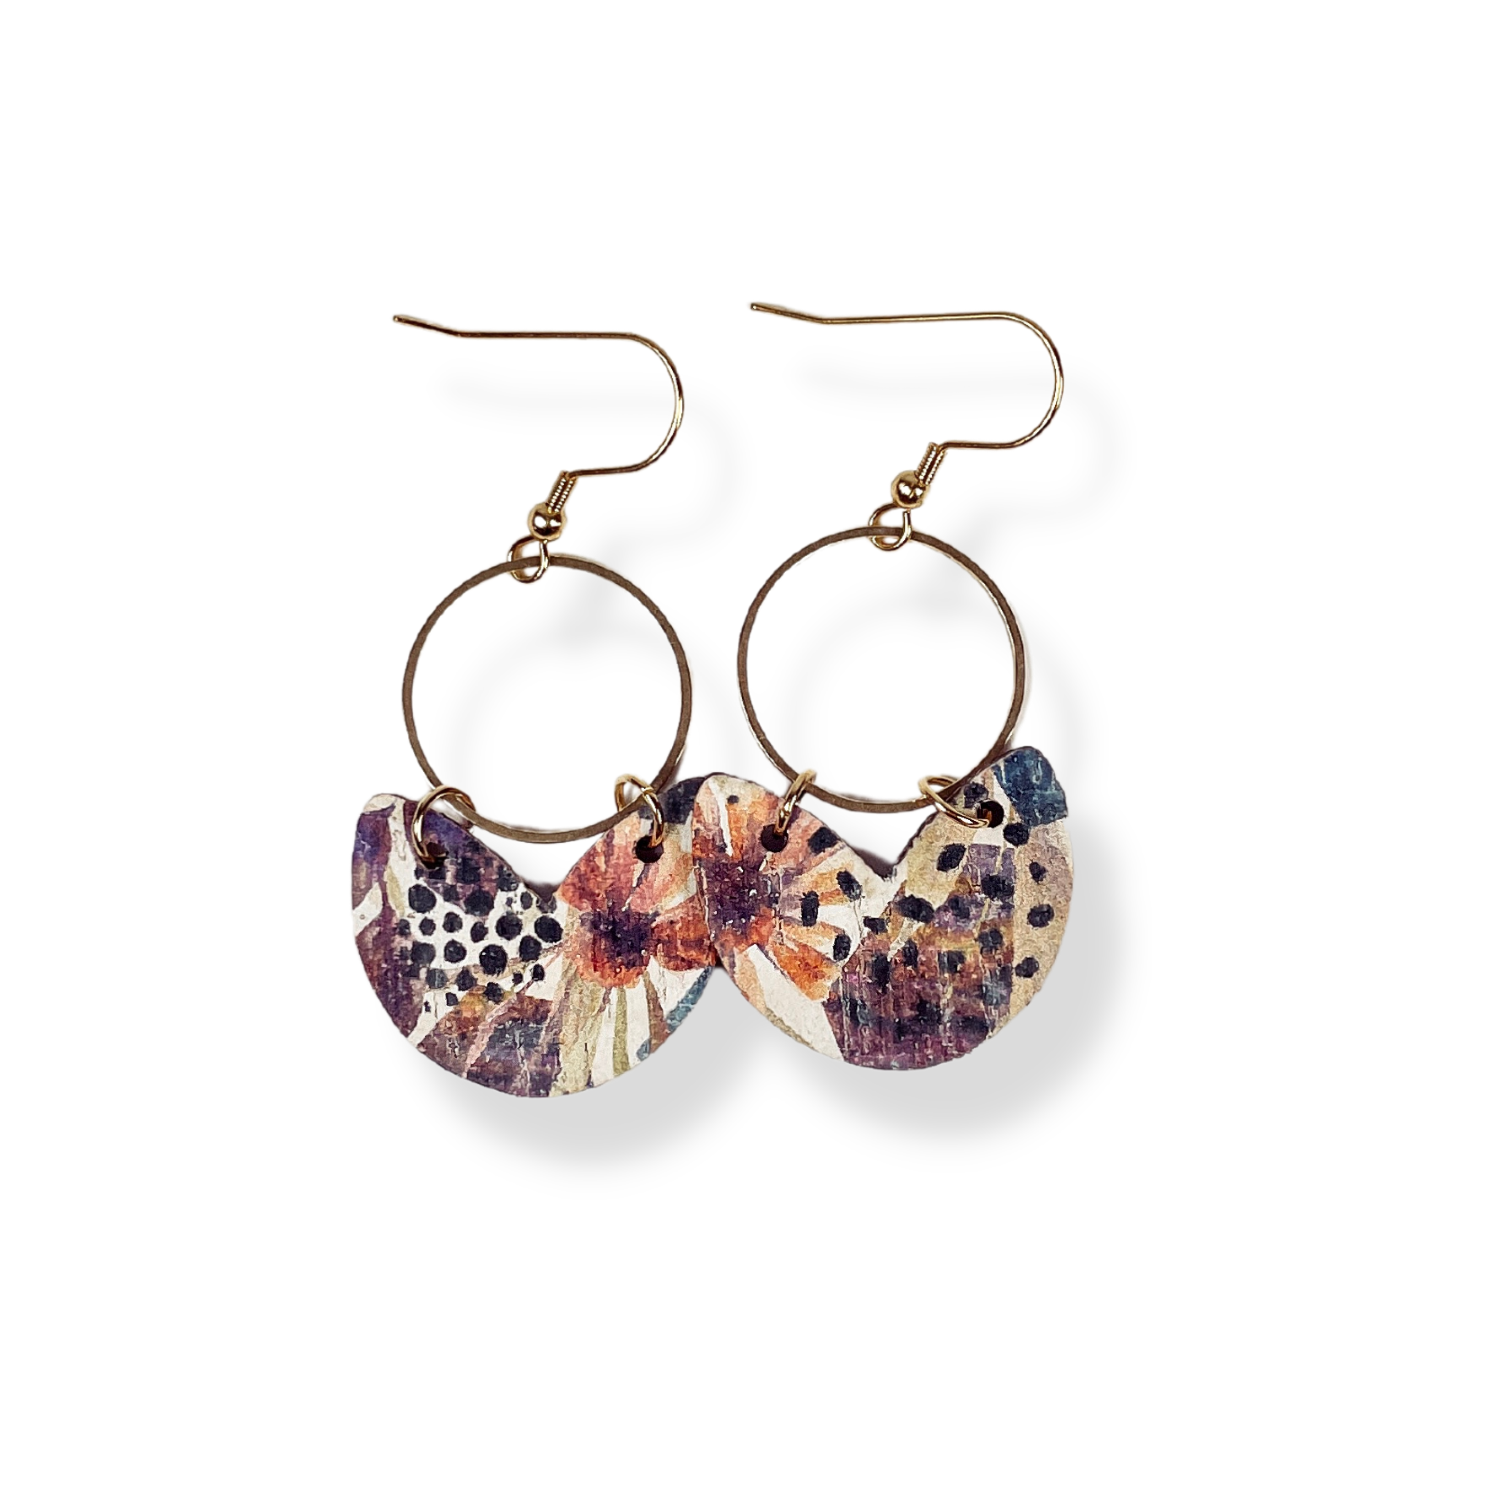 Amelia Cork and Gold Accent Dangly Earrings